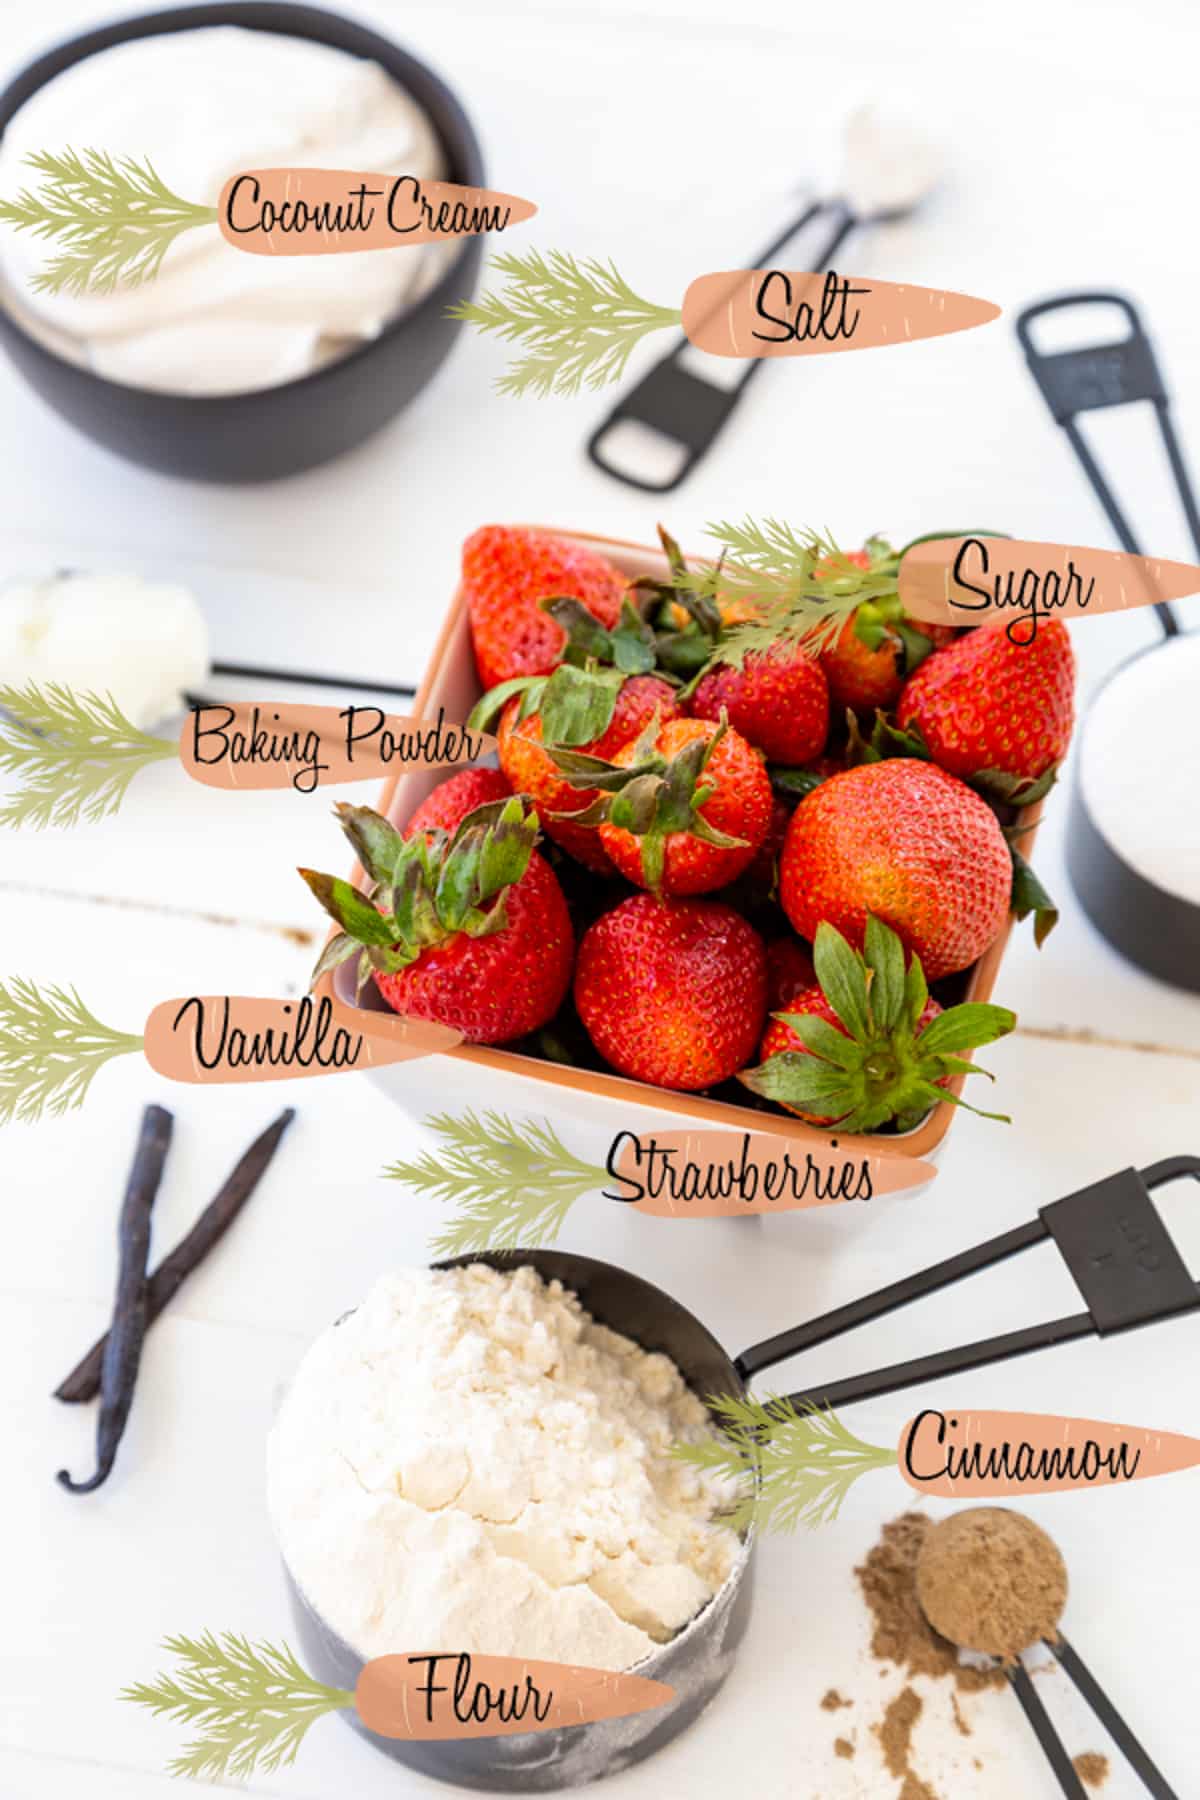 Ingredients for vegan strawberry shortcake that are labeled.